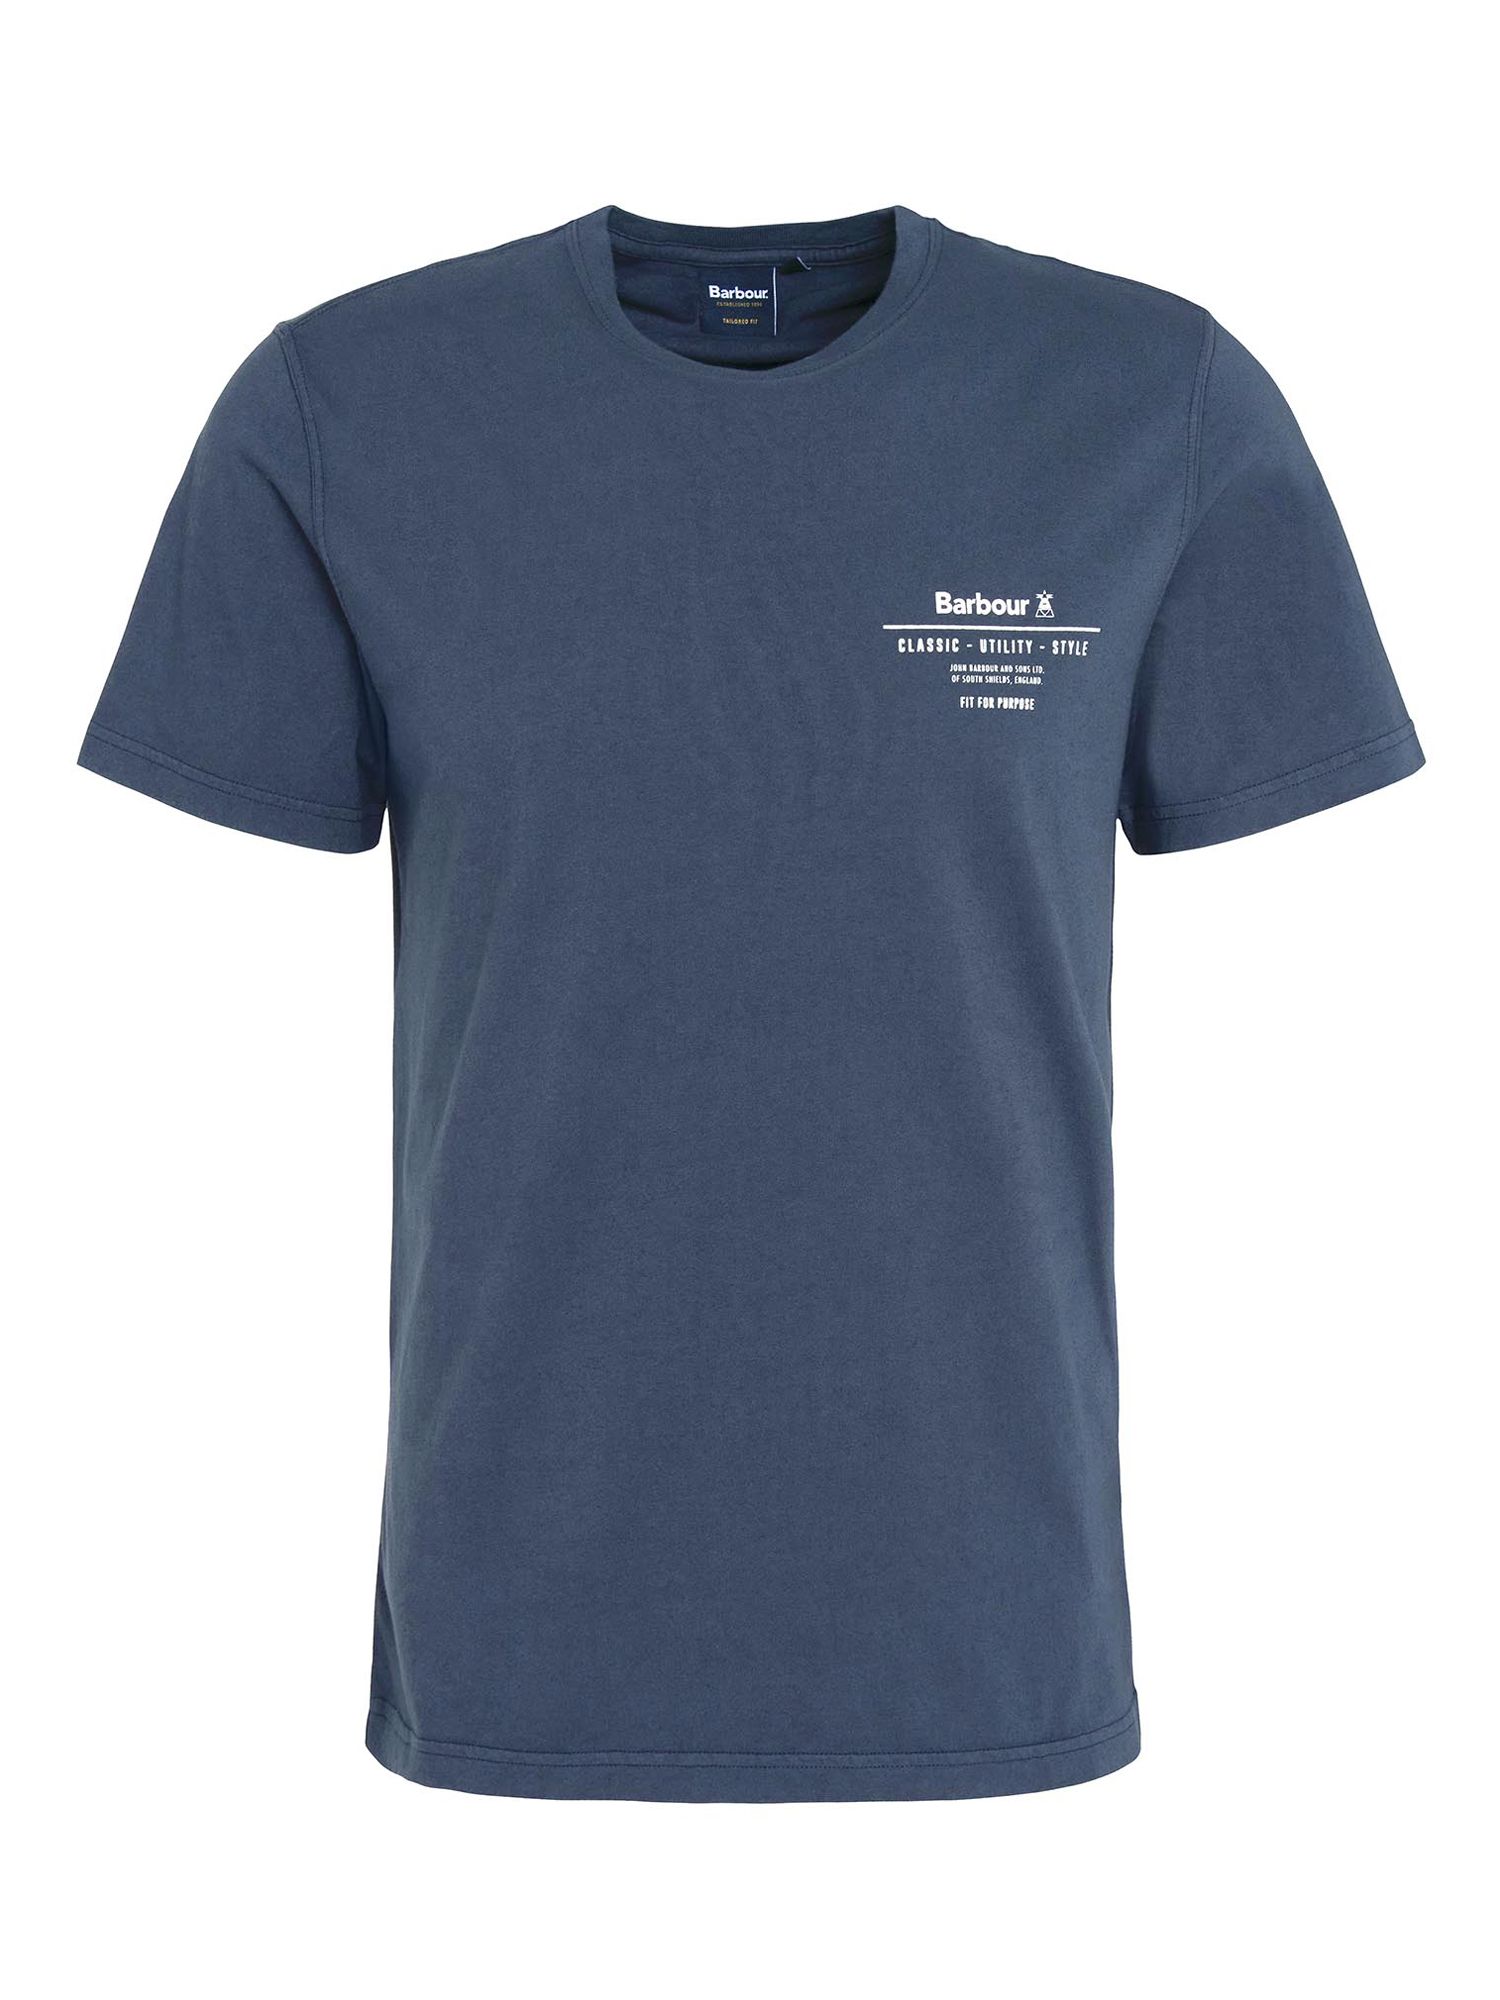 Barbour Hickling T-Shirt, Navy at John Lewis & Partners